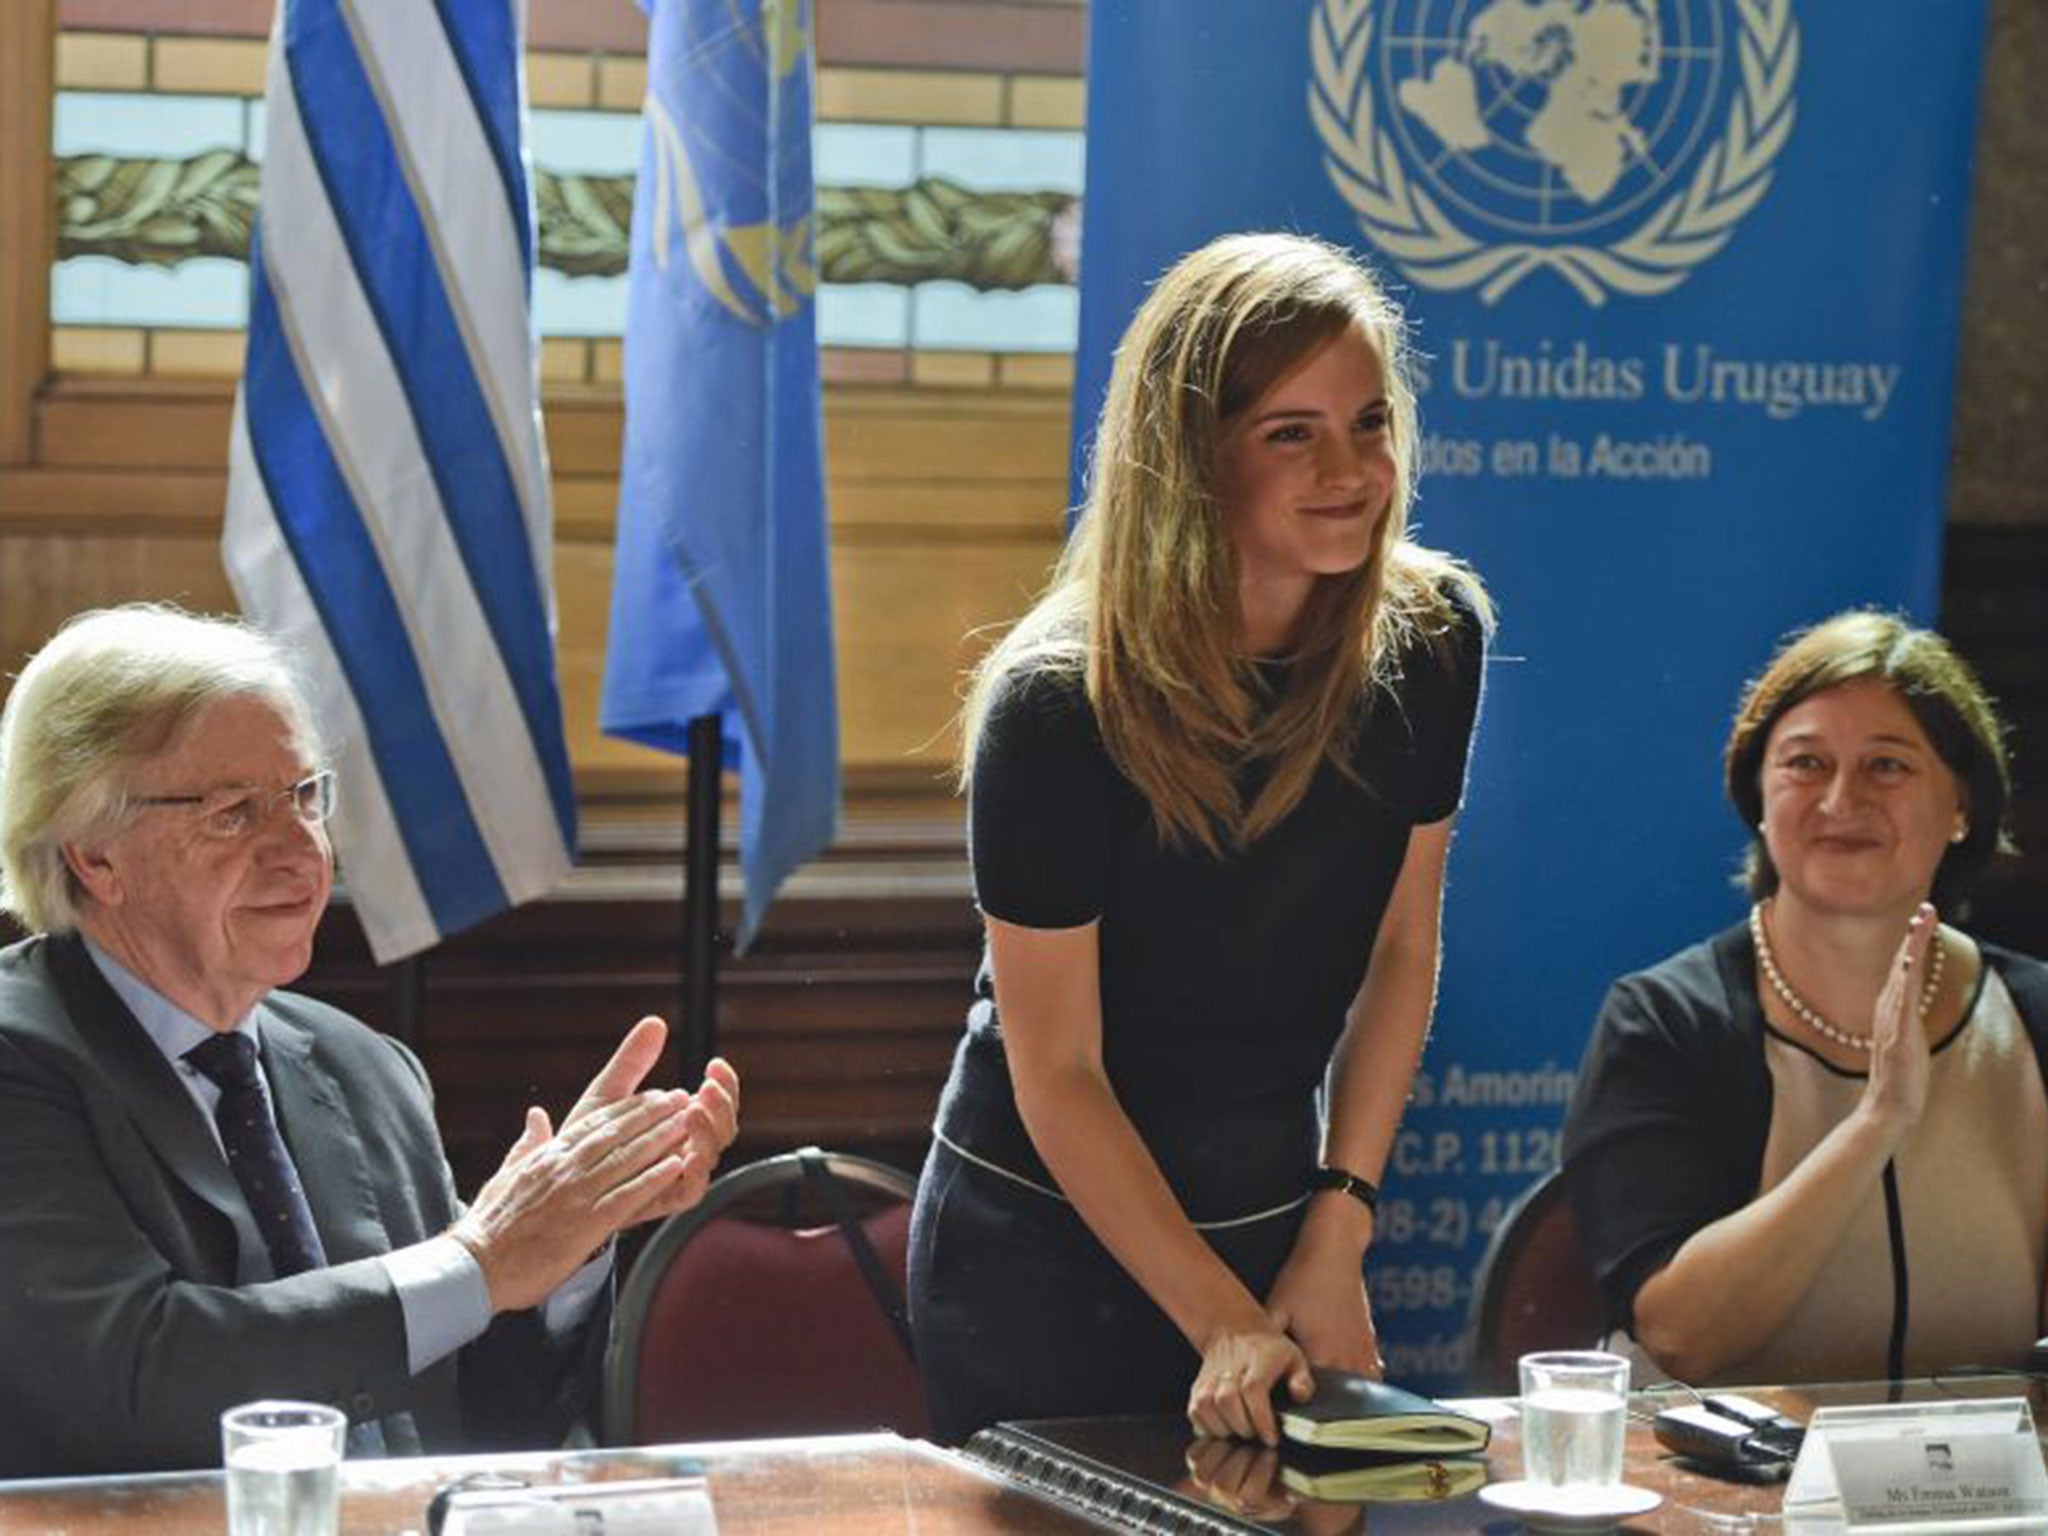 British actress and Goodwill Ambassador of the UN, Emma Watson, delivering a speech during an event petitioning for the increase of the presence of women in Parliament in Montevideo